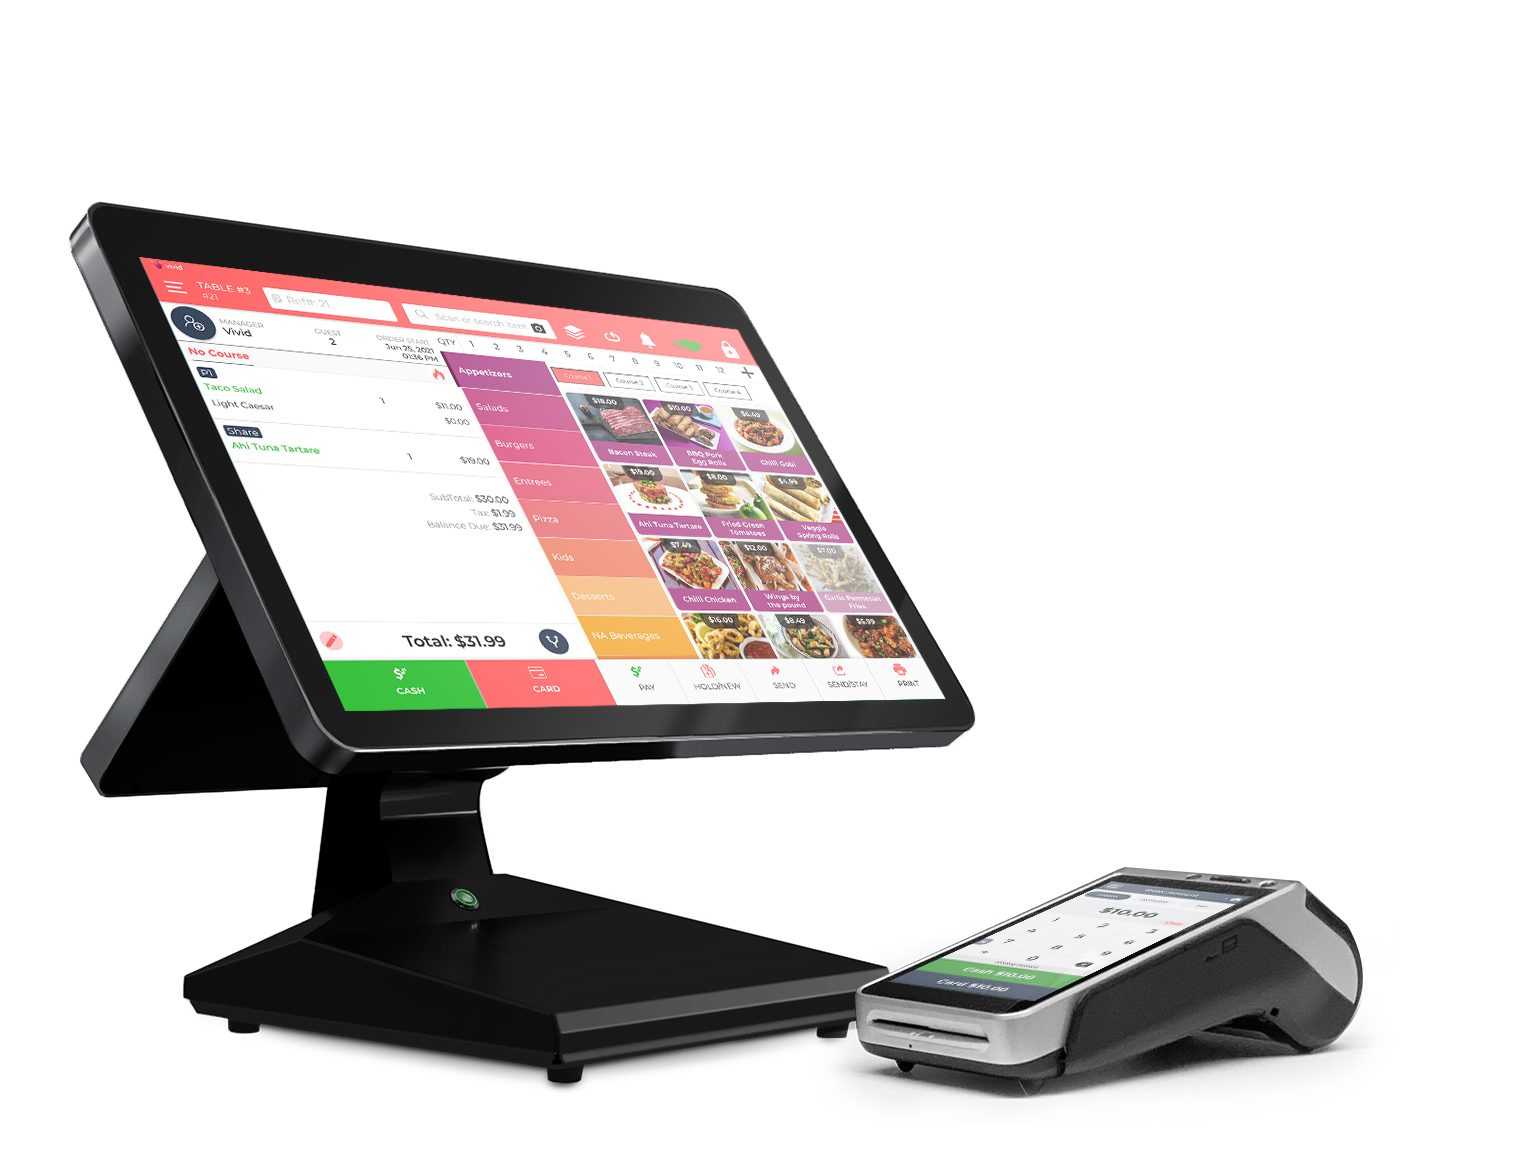 Vivid cloud POS software shown on AMP Bridge counter-top terminal and on the AMP 8200 EMV Smart Terminal.